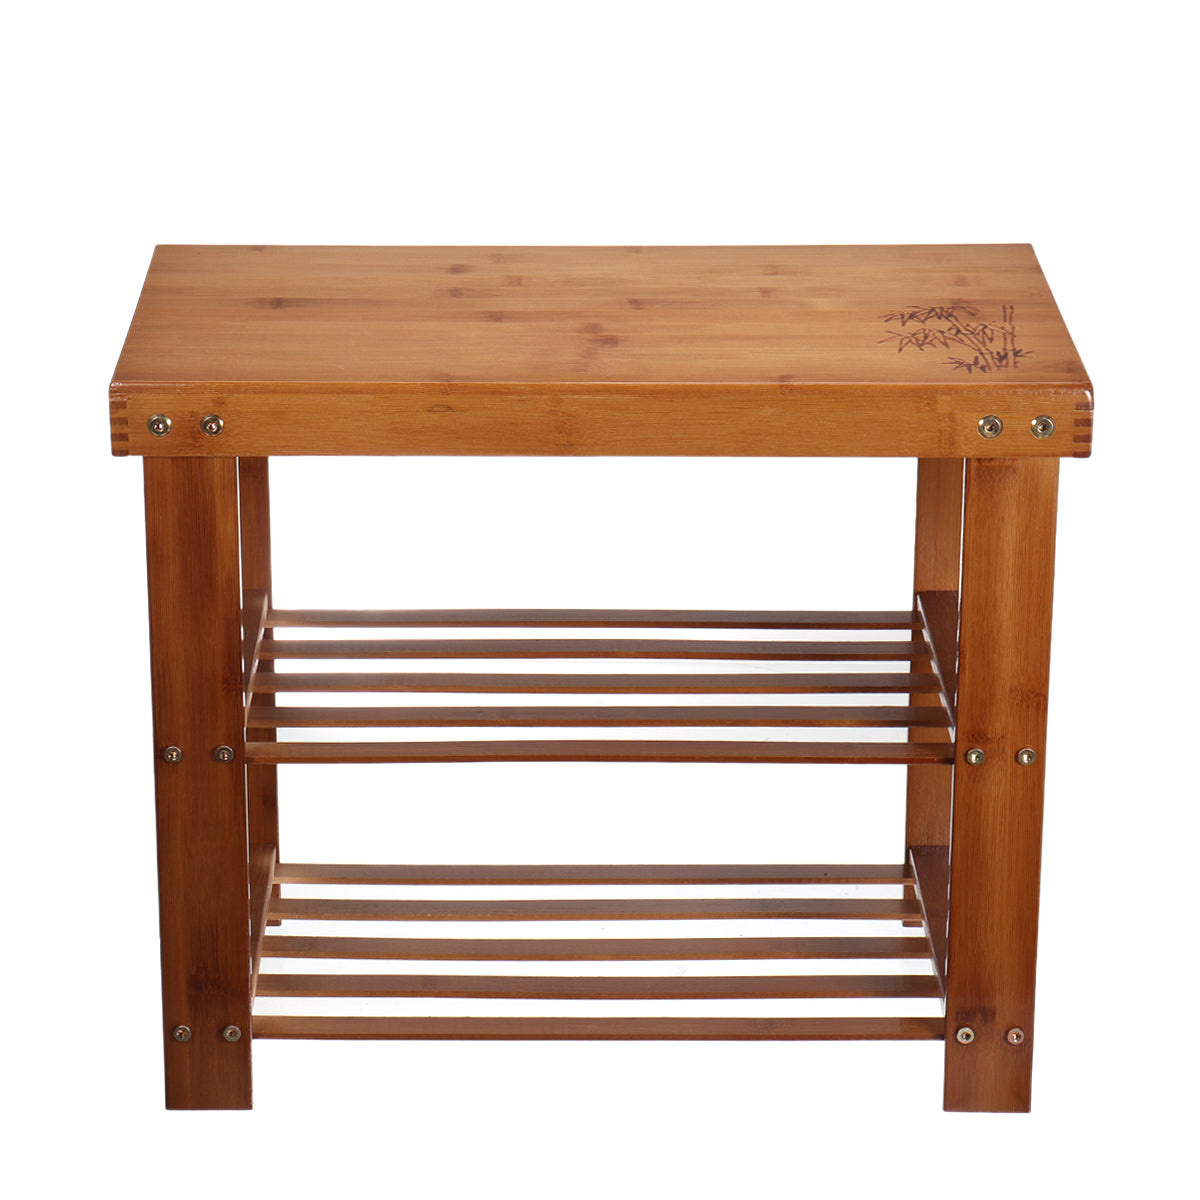 Bench Storage Stool Shoe Wooden Shoes Rack Bamboo Stand Chair Organiser